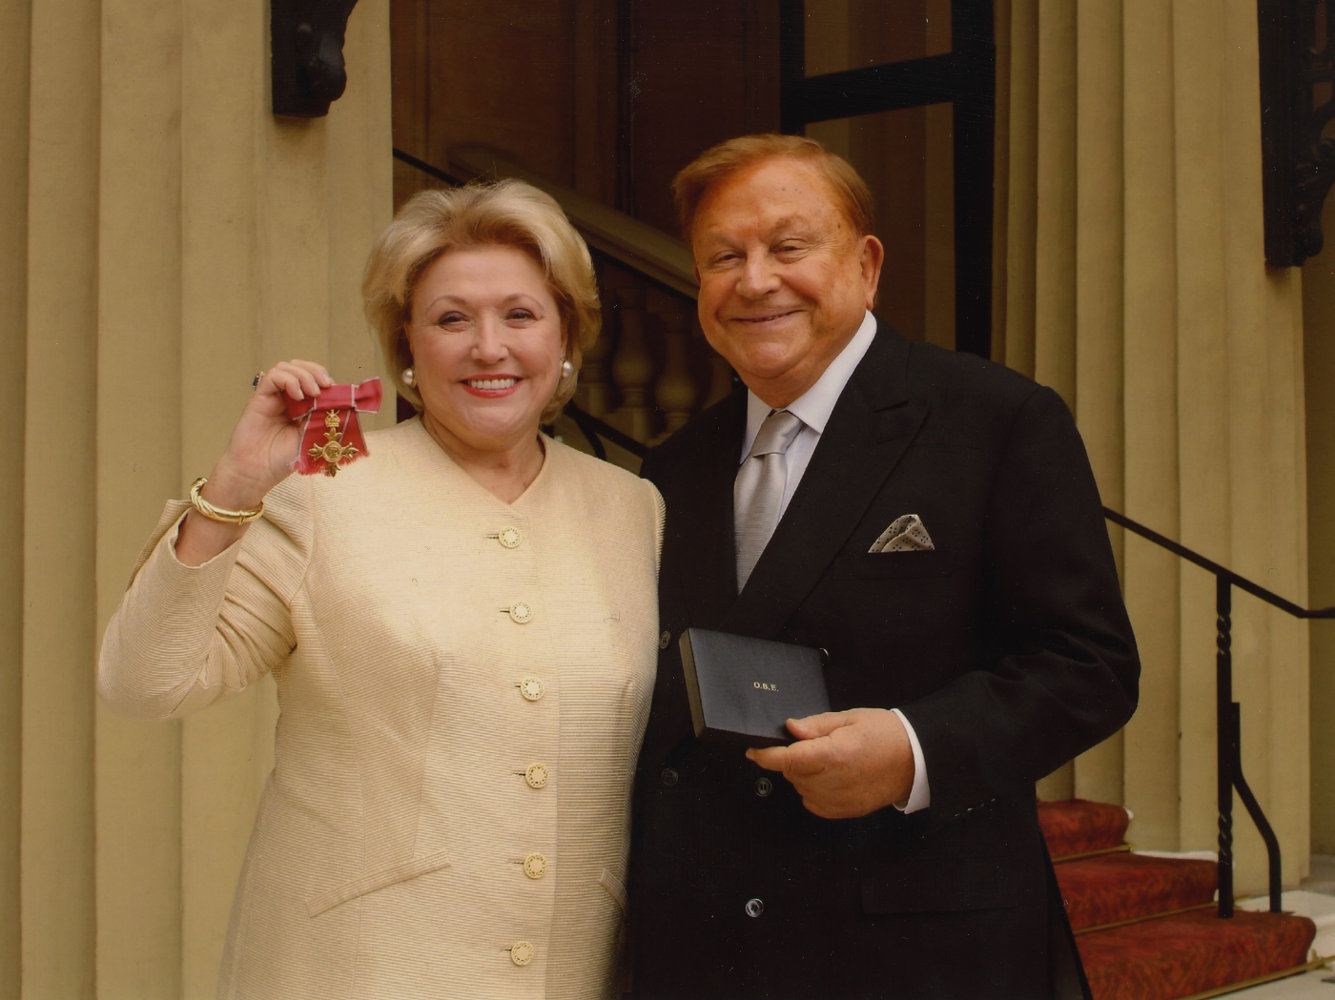 Robert Bradford pictured with Barbara Taylor Bradford after she received her OBE, Buckingham Palace